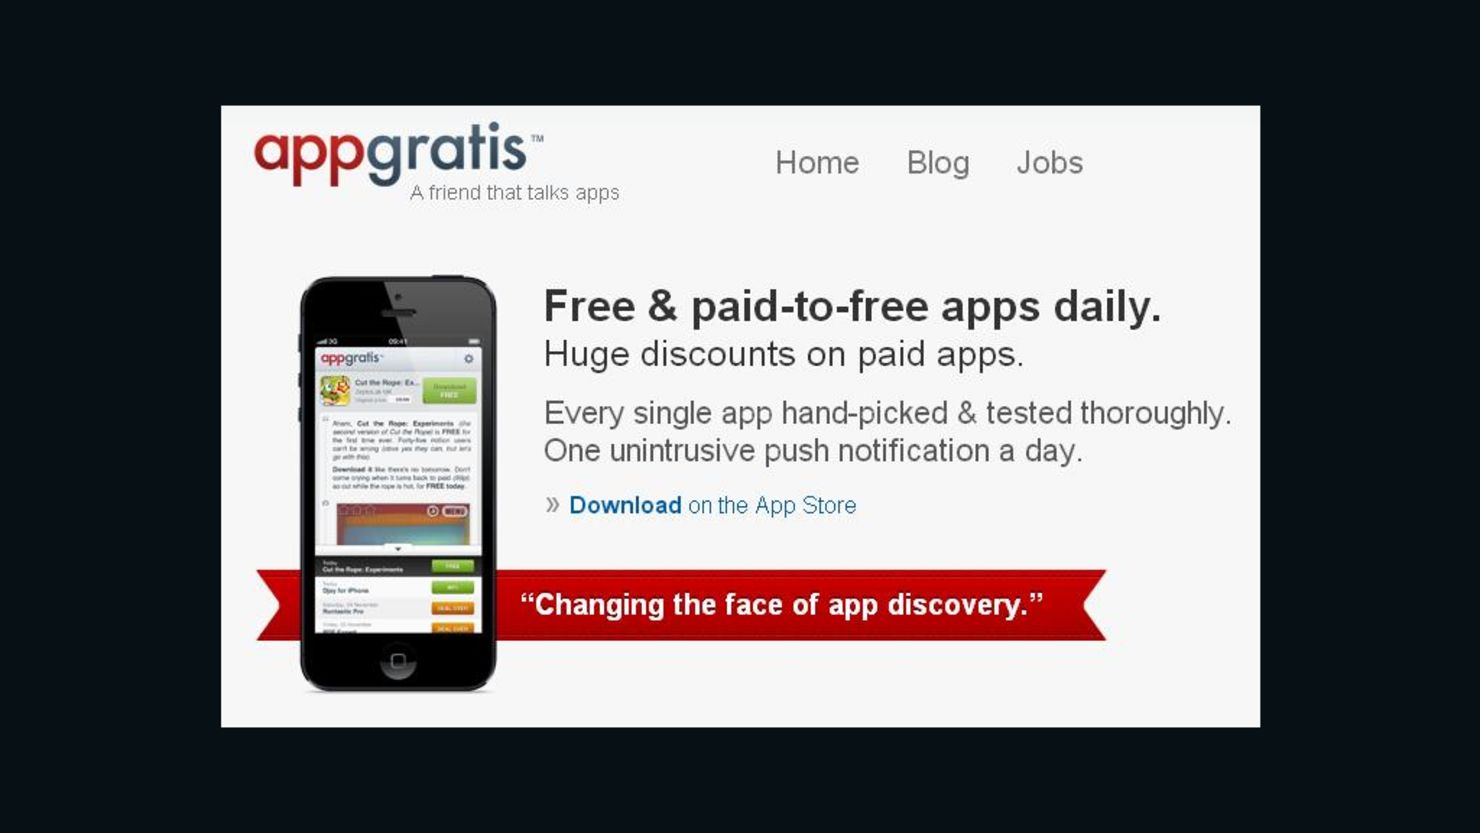 AppGratis, which helps Apple mobile users find other apps for free, has been banned by Apple for alleged violations of its terms.